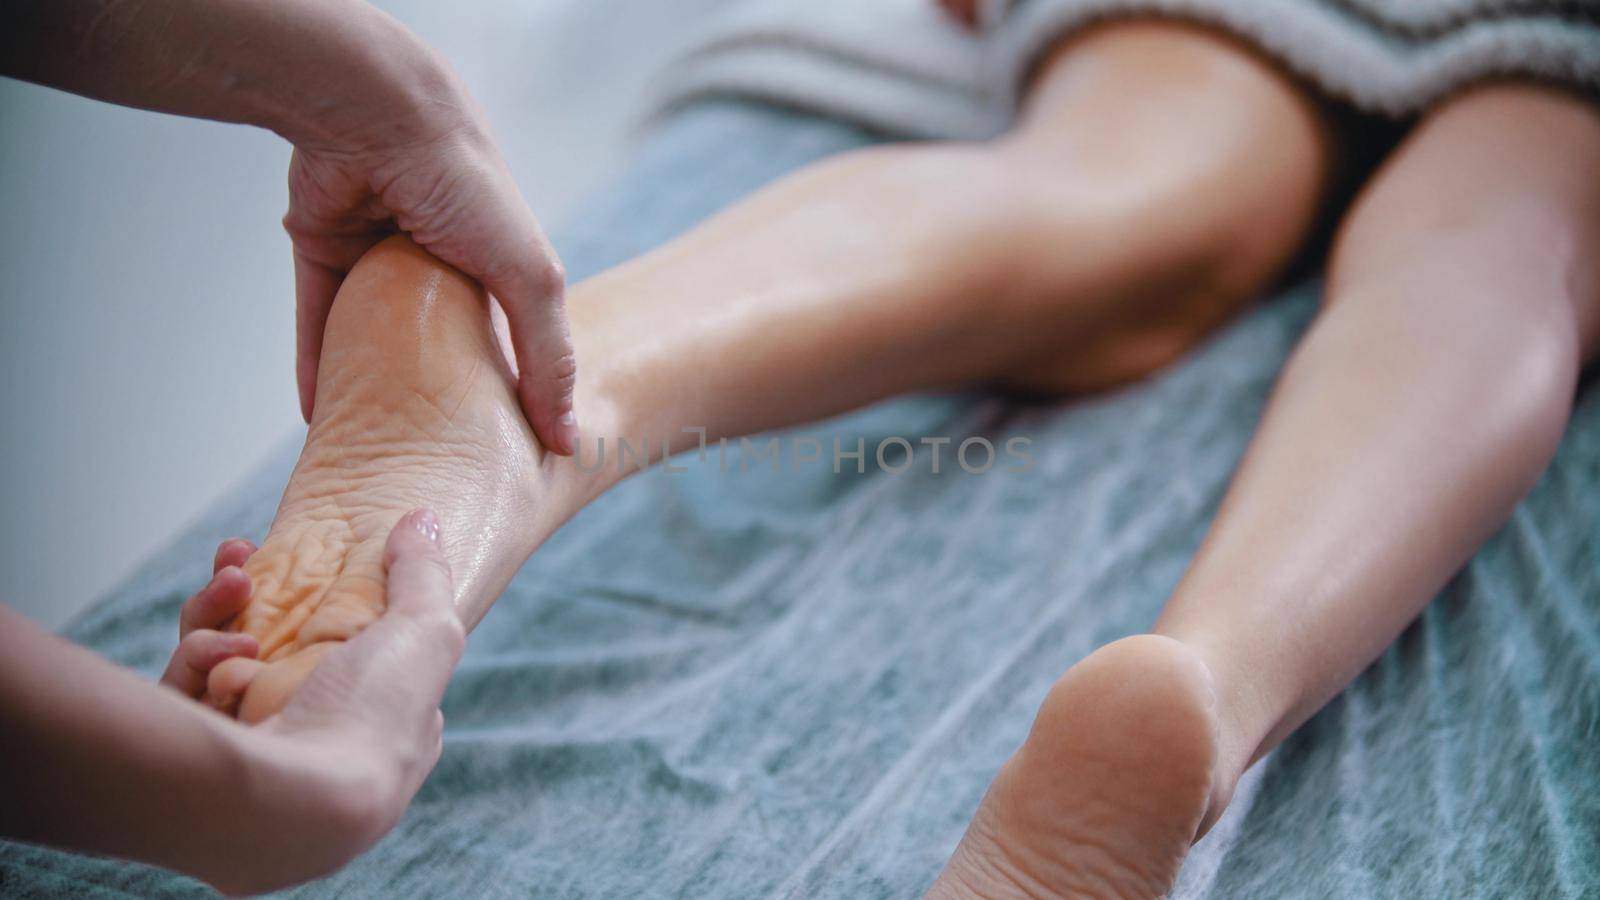 Massage - massage master is kneading womans feet with both hands - indoor